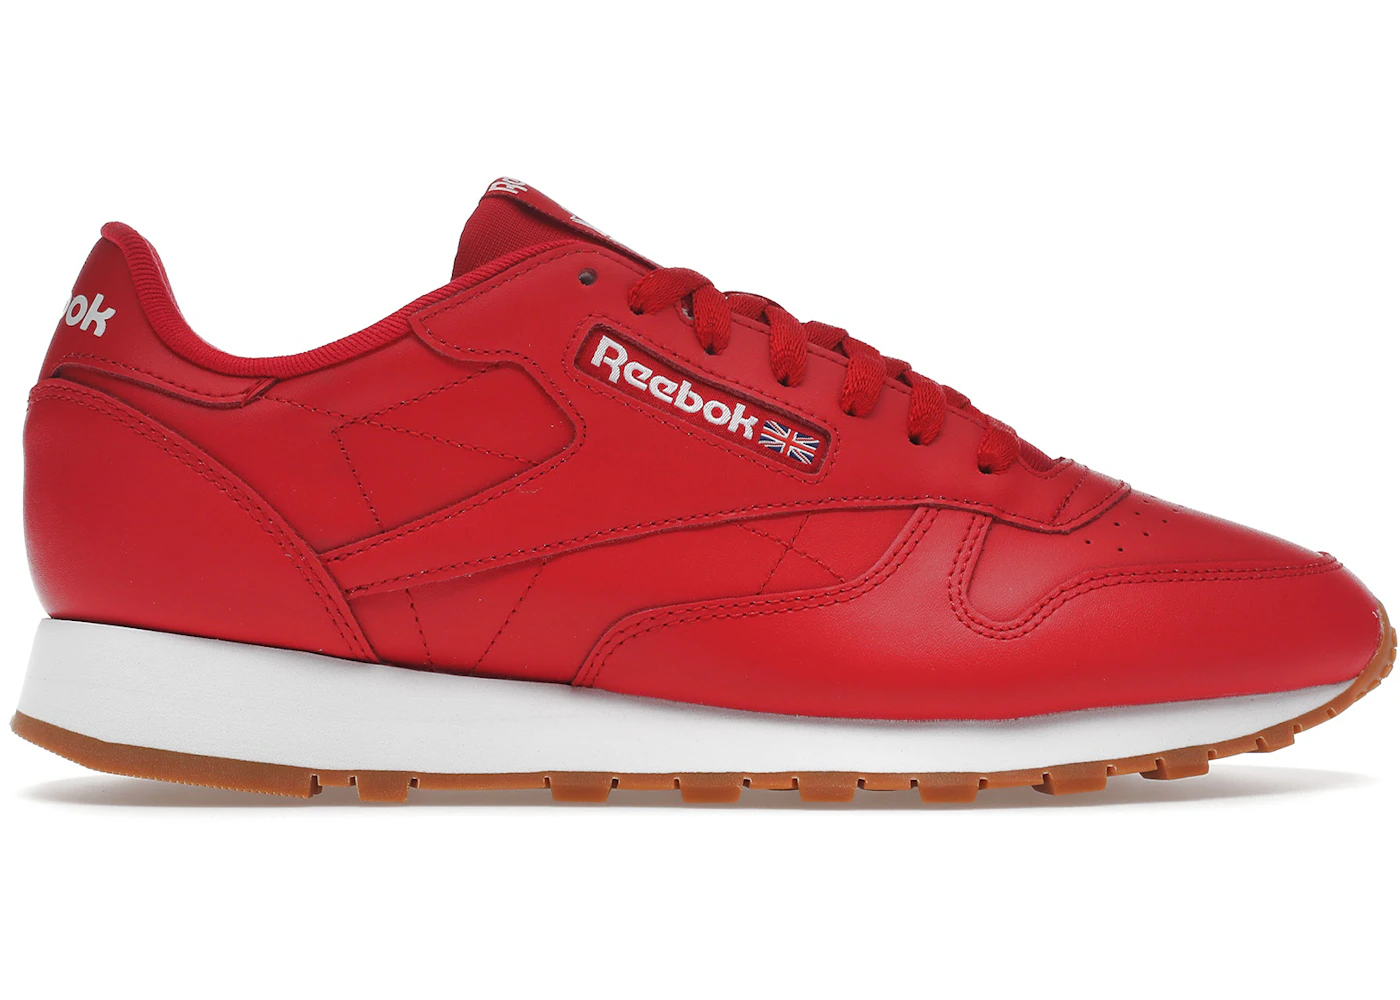 Reebok Classic Leather Red Footwear White Men's - GY3601 - US